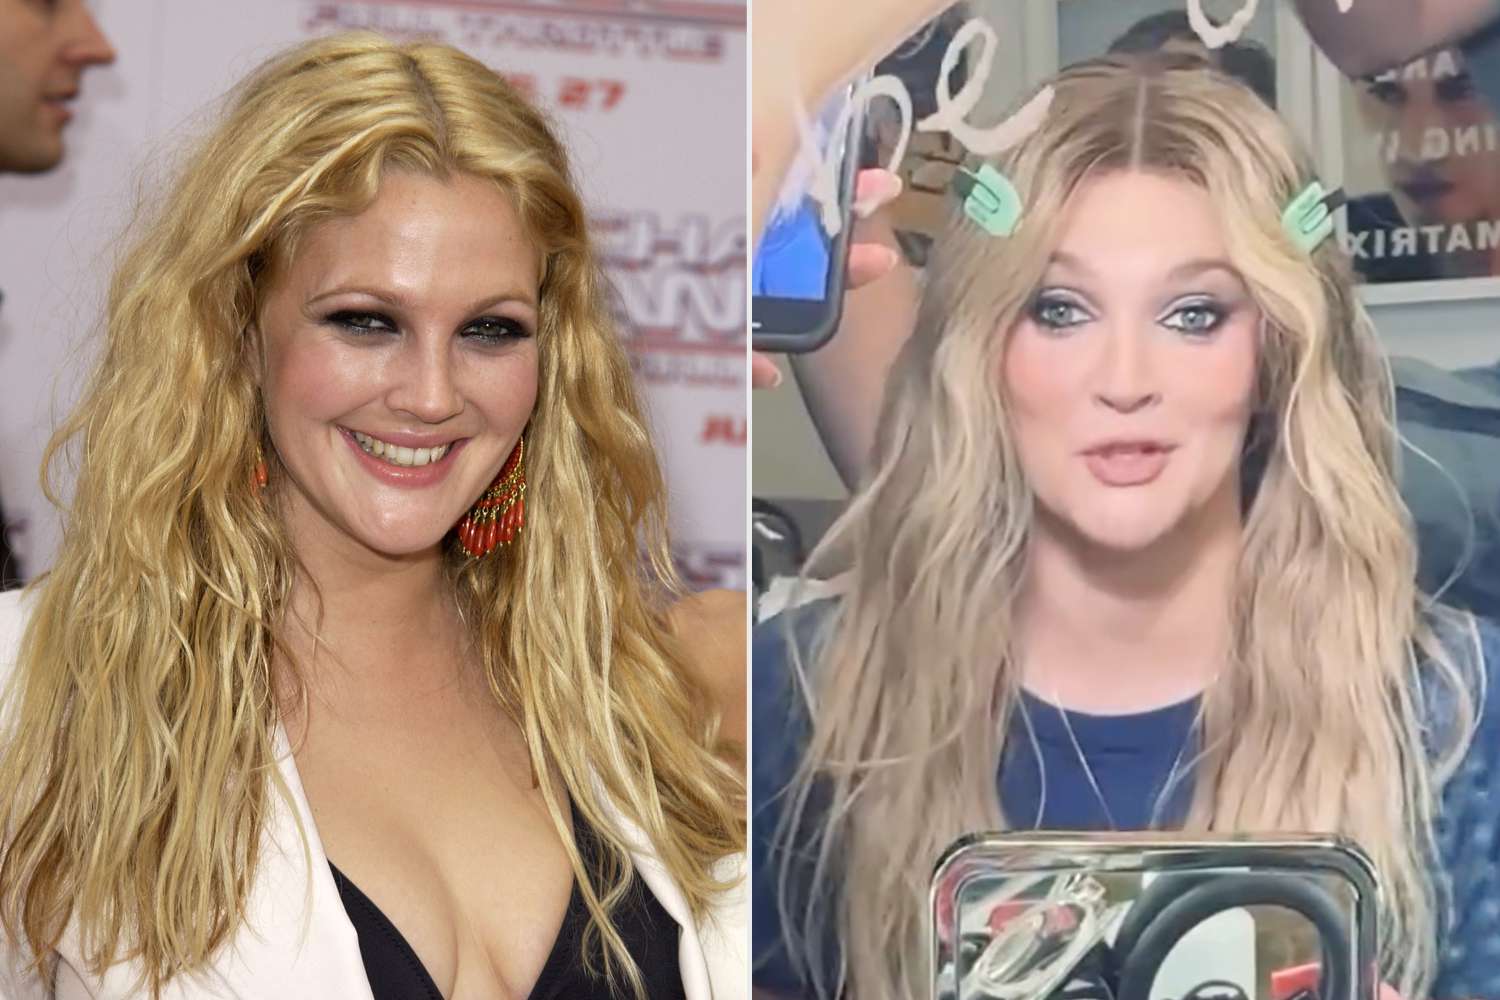 Drew Barrymore Recreates Her 2003 Charlie’s Angels Premiere Look, Crimped Blonde Hair and All!